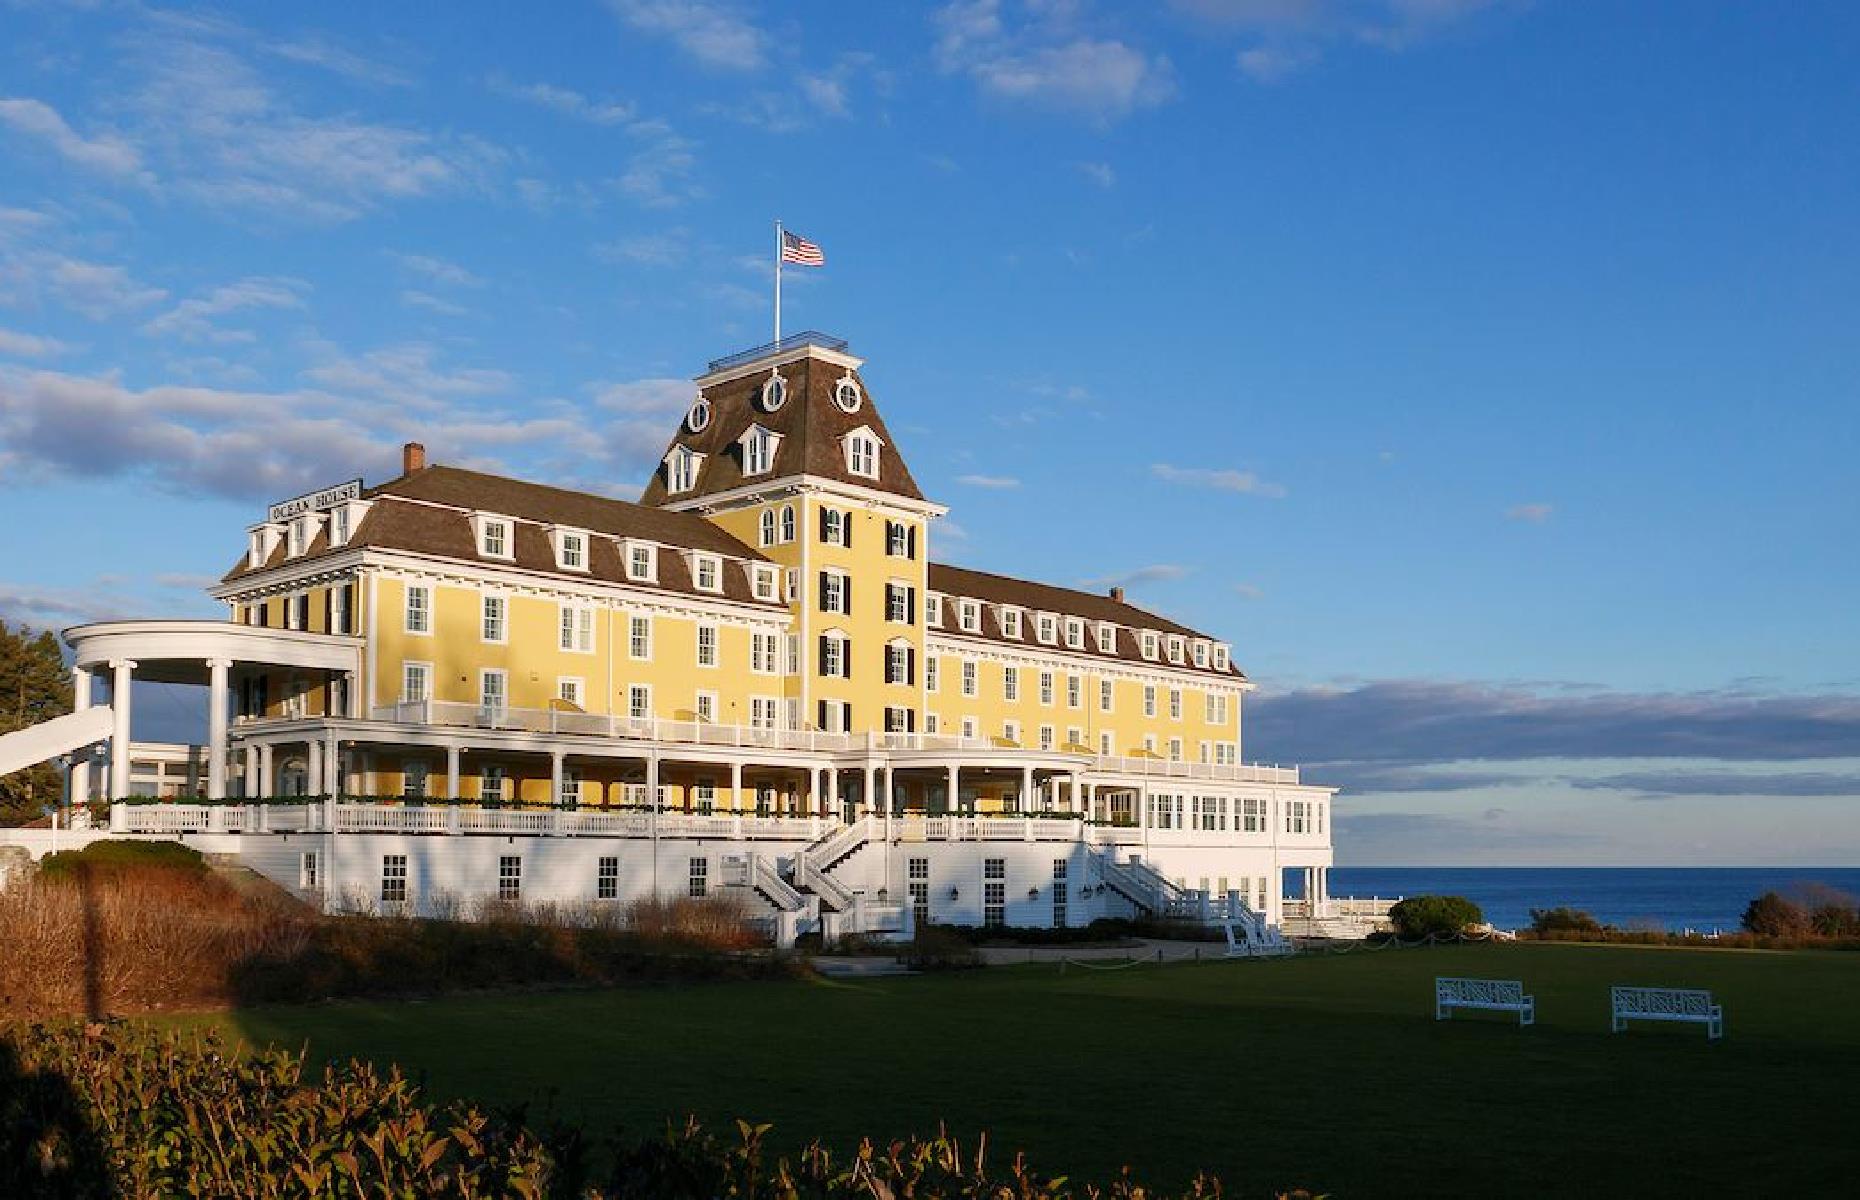 <p>Having first opened in 1868, <a href="https://www.oceanhouseri.com/">Ocean House</a> is old, but it was completely rebuilt and refurbished in 2004 to create a resort that combines historic East Coast charm with modern convenience and amenities. The accommodation choices range from tastefully-decorated standard rooms to unique, luxury suites and homey beach cottages. Outside of their rooms, visitors can lounge in a beach cabana, take a spin in a yacht, indulge in a spa treatment or just enjoy the crisp Rhode Island sea air.</p>